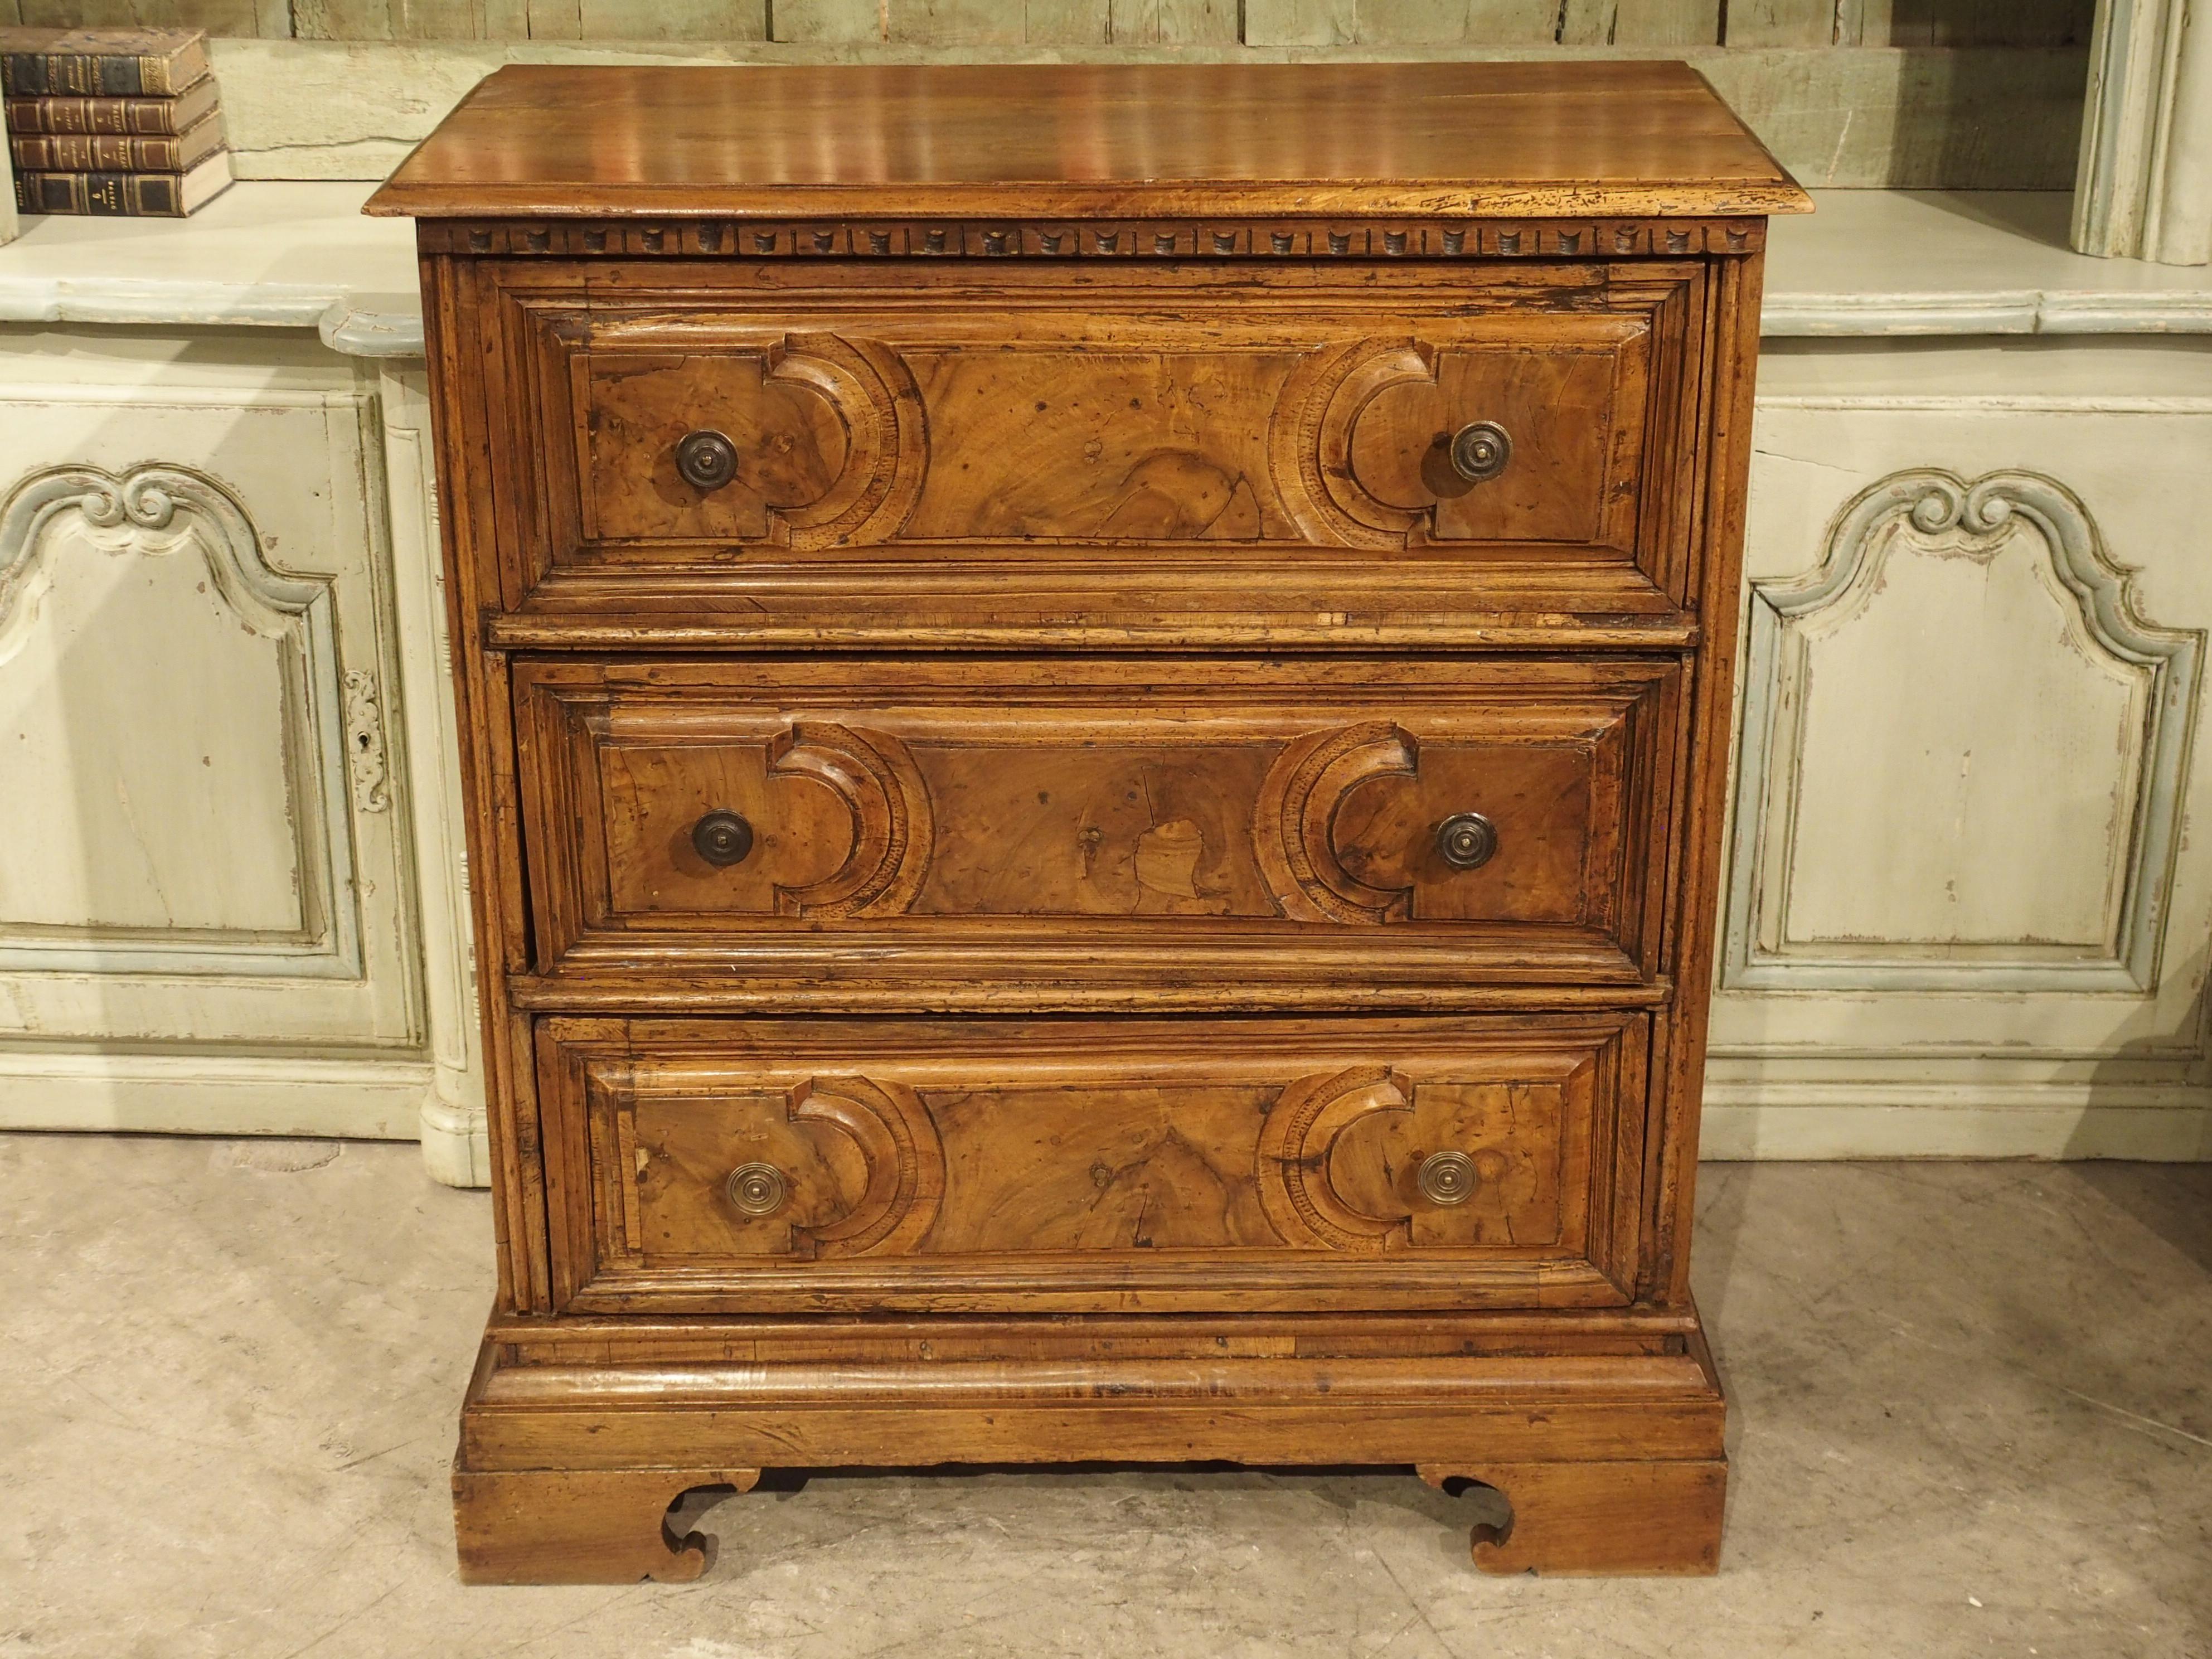 Hand carved during the 1700’s, this Italian chest of drawers features burl veneer and bronze pulls. A burl occurs when wood grain grows in a misshapen manner, as the result of stress to the tree. Burled wood is highly valued because it yields deeply